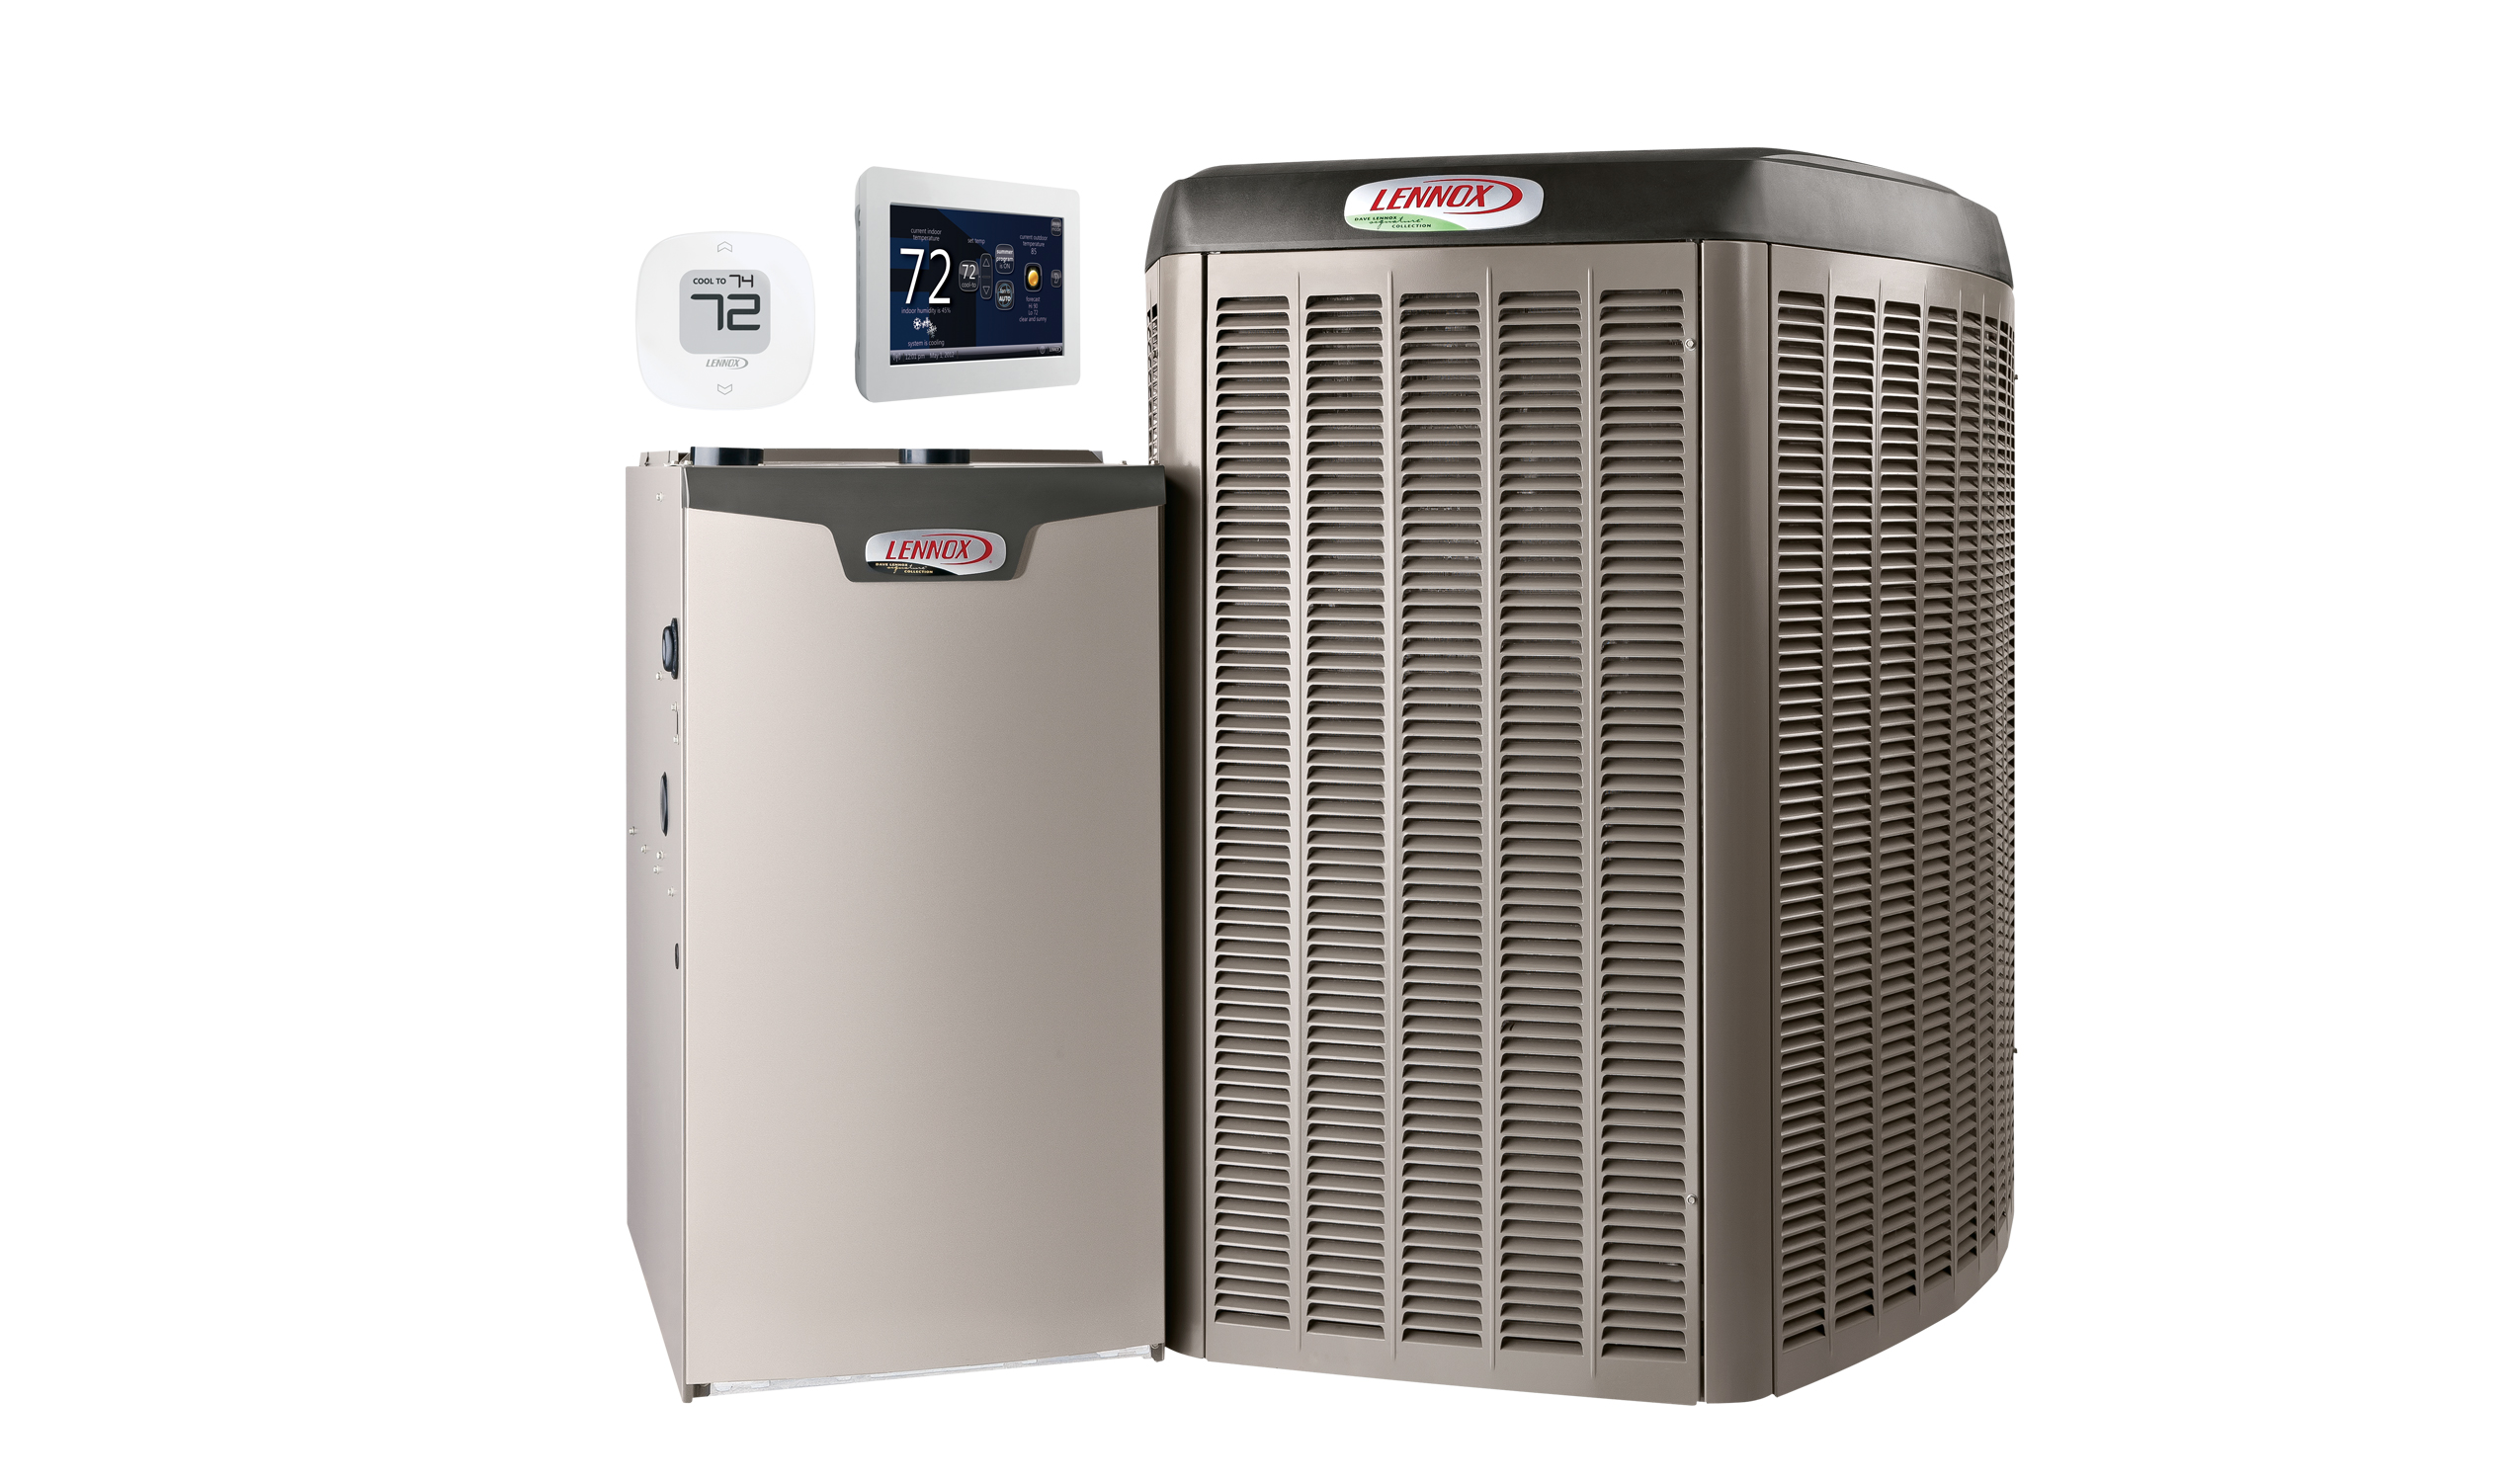 Lennox AC and refrigerator with thermostat